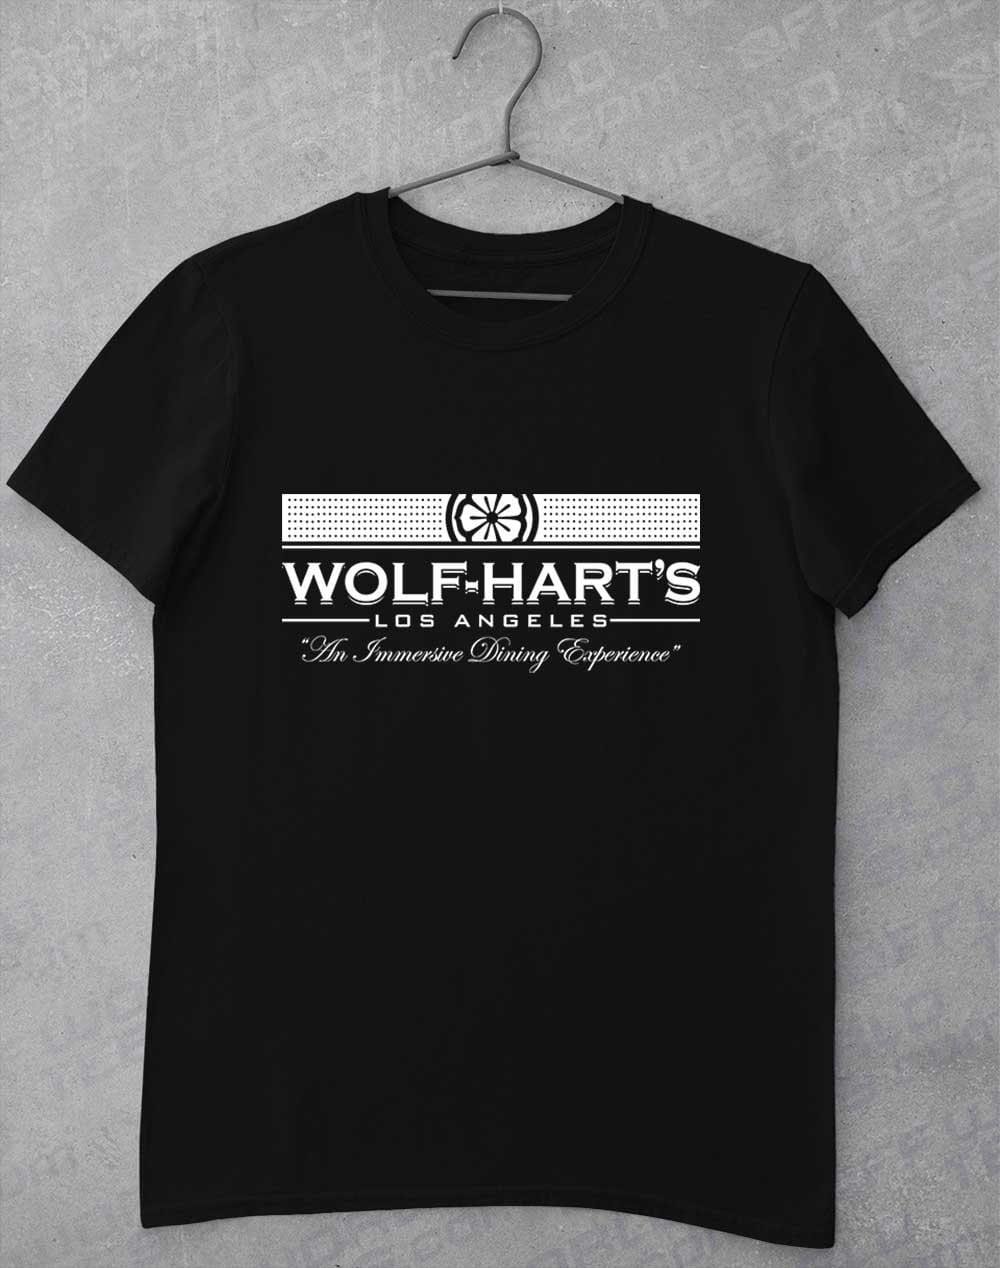 Wolf-Hart's Dining Experience T-Shirt S / Black  - Off World Tees